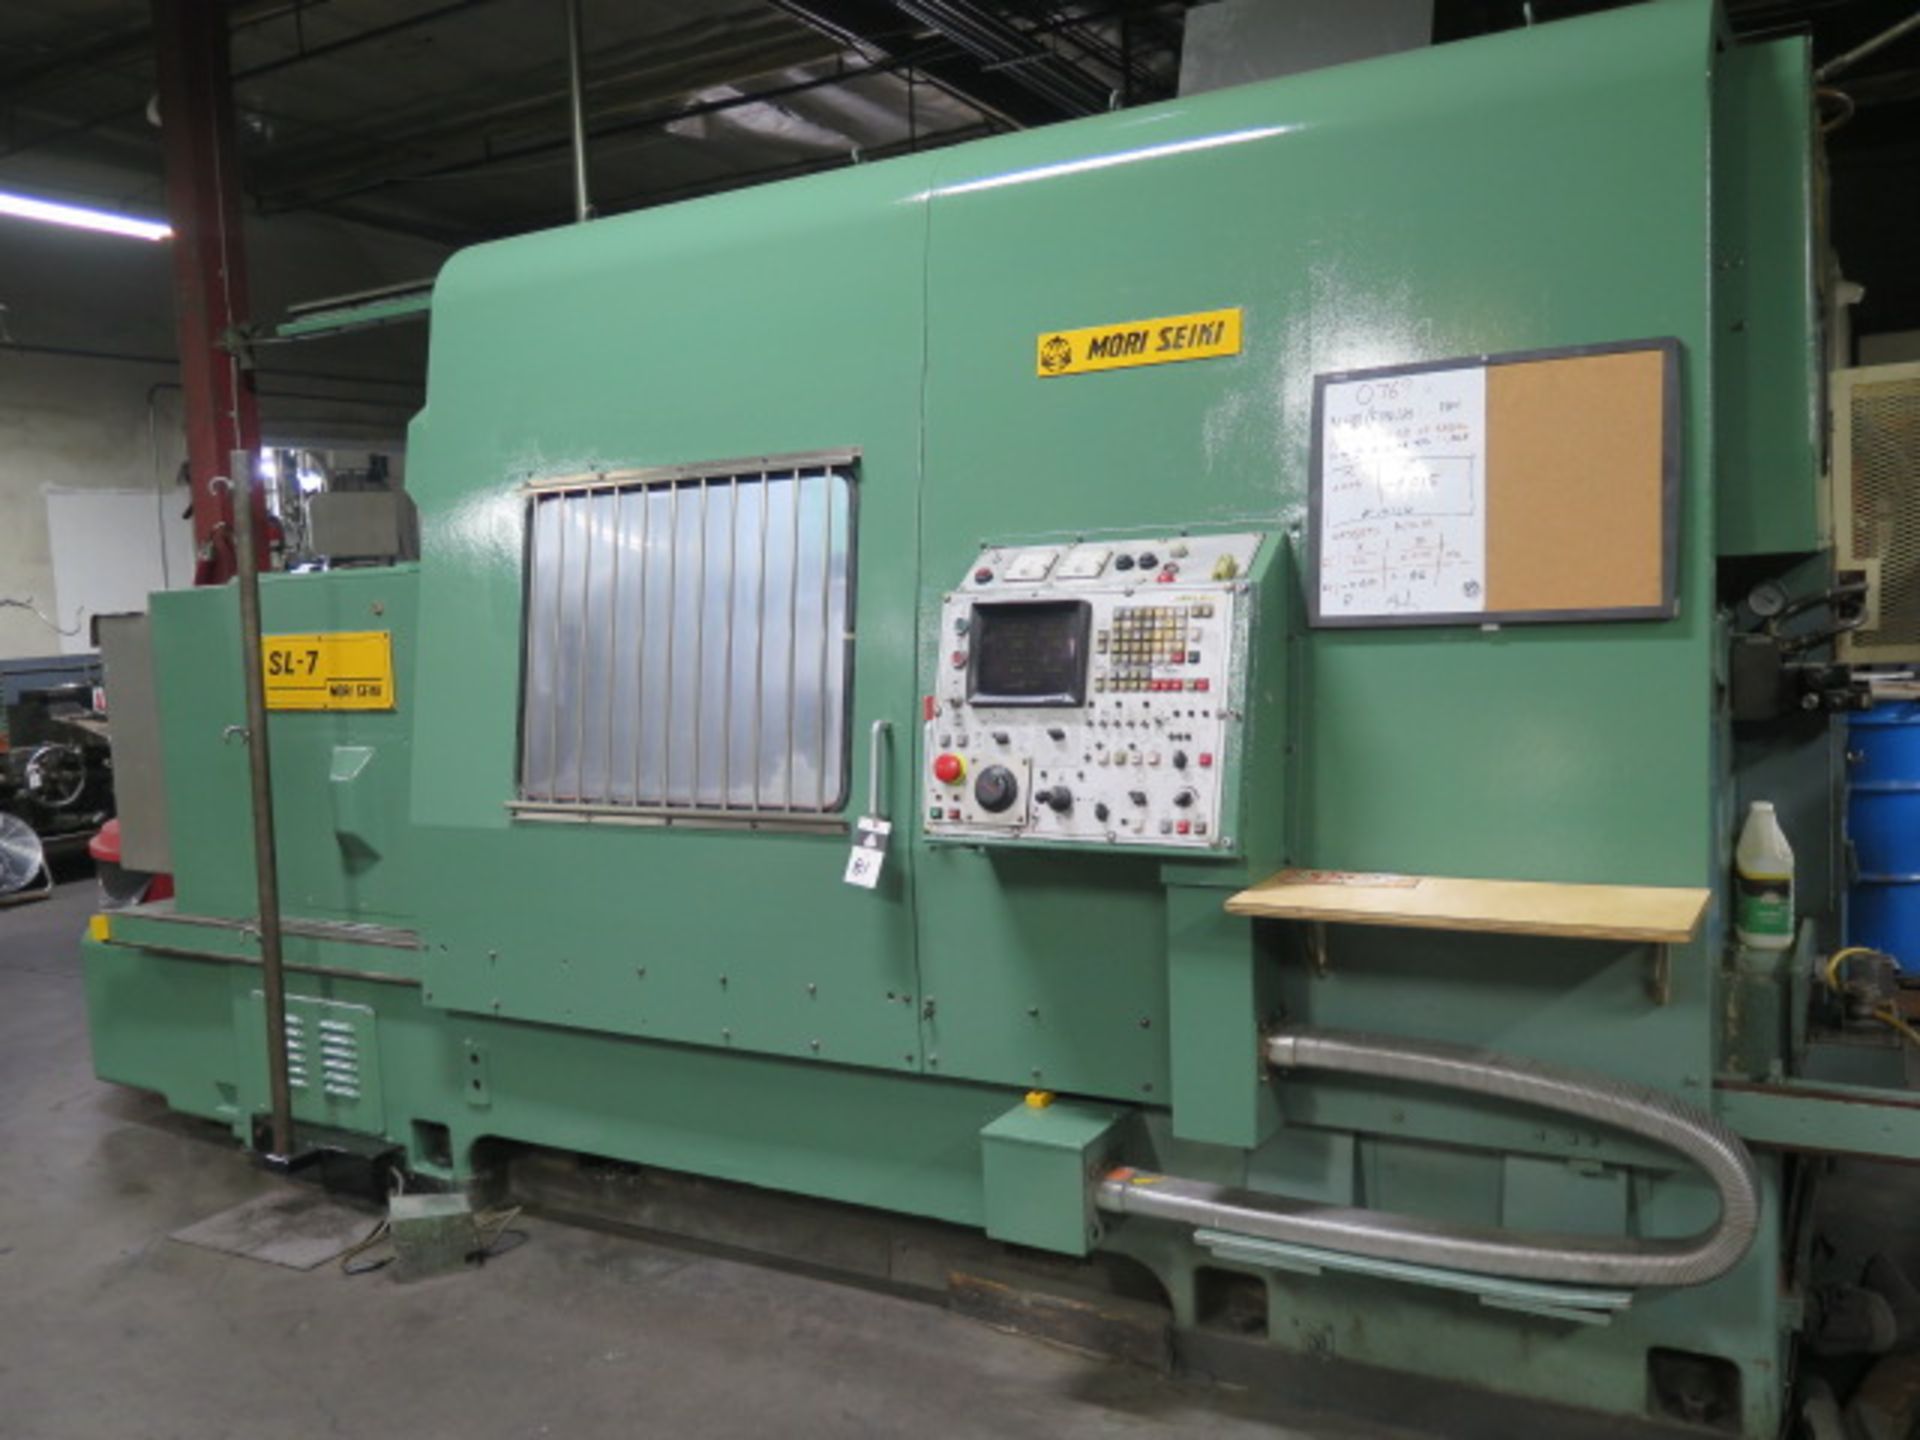 Mori Seiki SL-7C CNC Turning Center s/n 2300 w/ Fanuc System 6T Controls, 12-St Turret, SOLD AS IS - Image 2 of 20